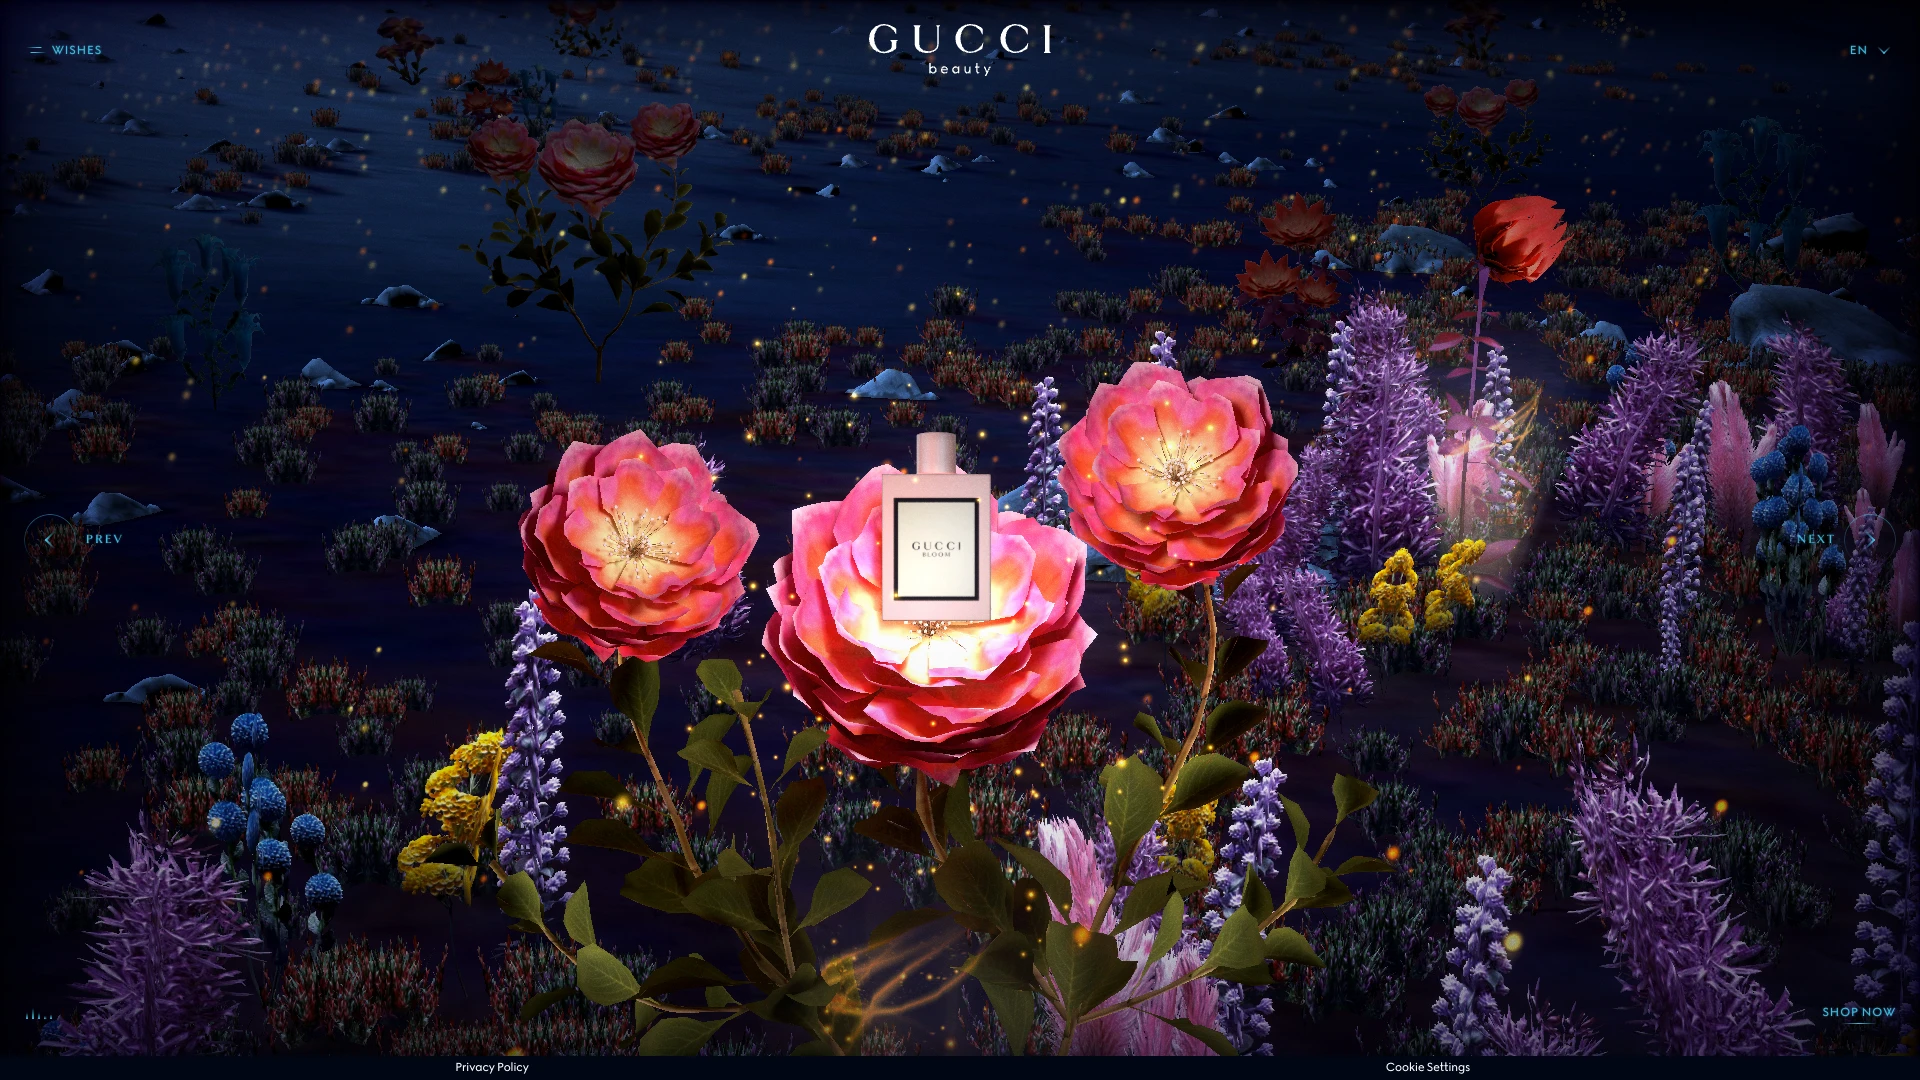 Gucci Beauty Wishes